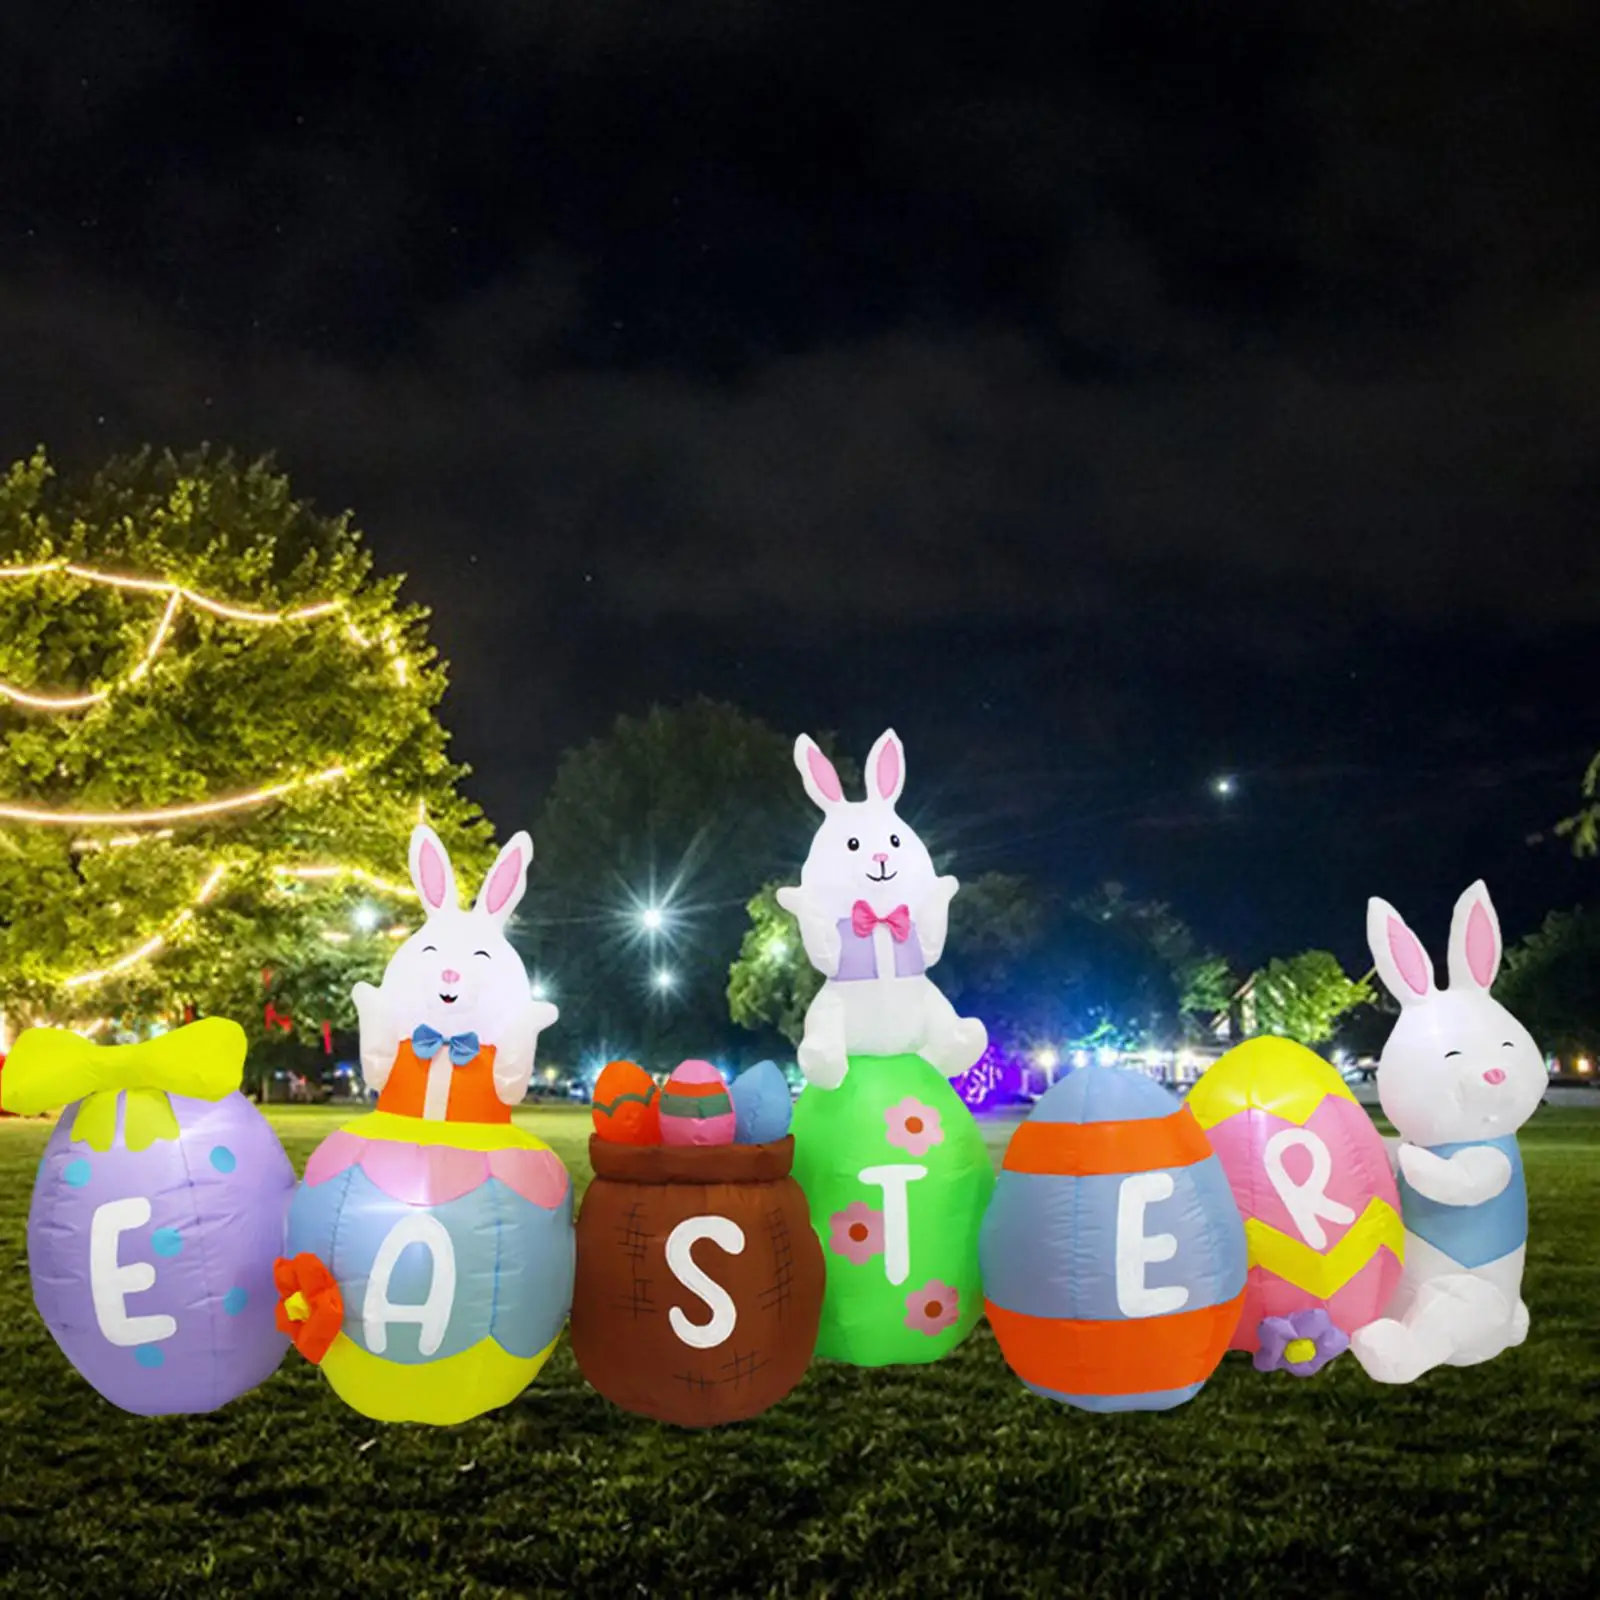 

Easter Inflatables Outdoor Decorations Novelty Giant for House Outside Party